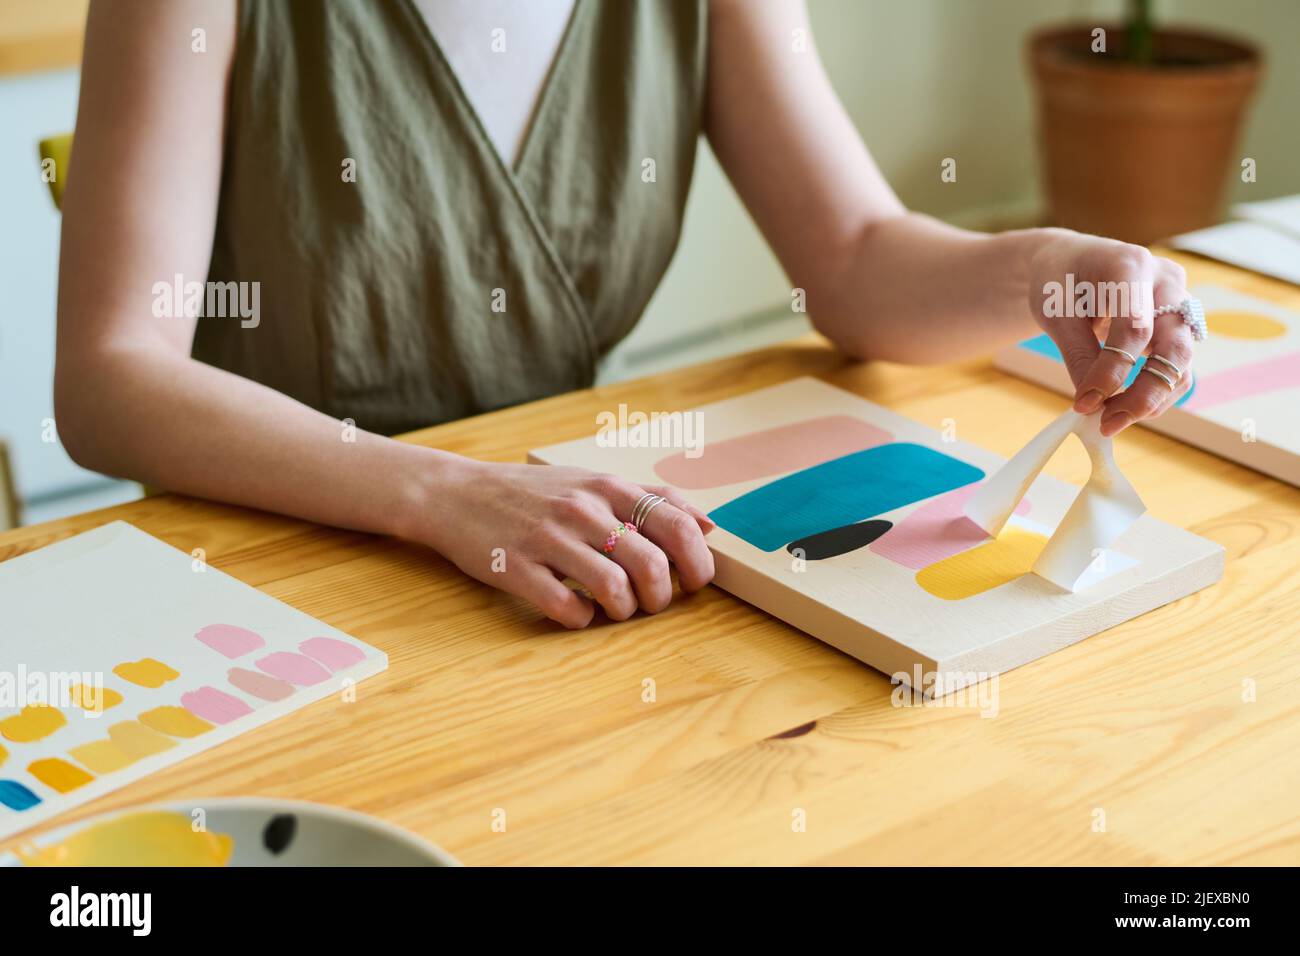 Hands of young creative female sitting by wooden table in workshop or studio and using stencil while creating new abstract painting Stock Photo